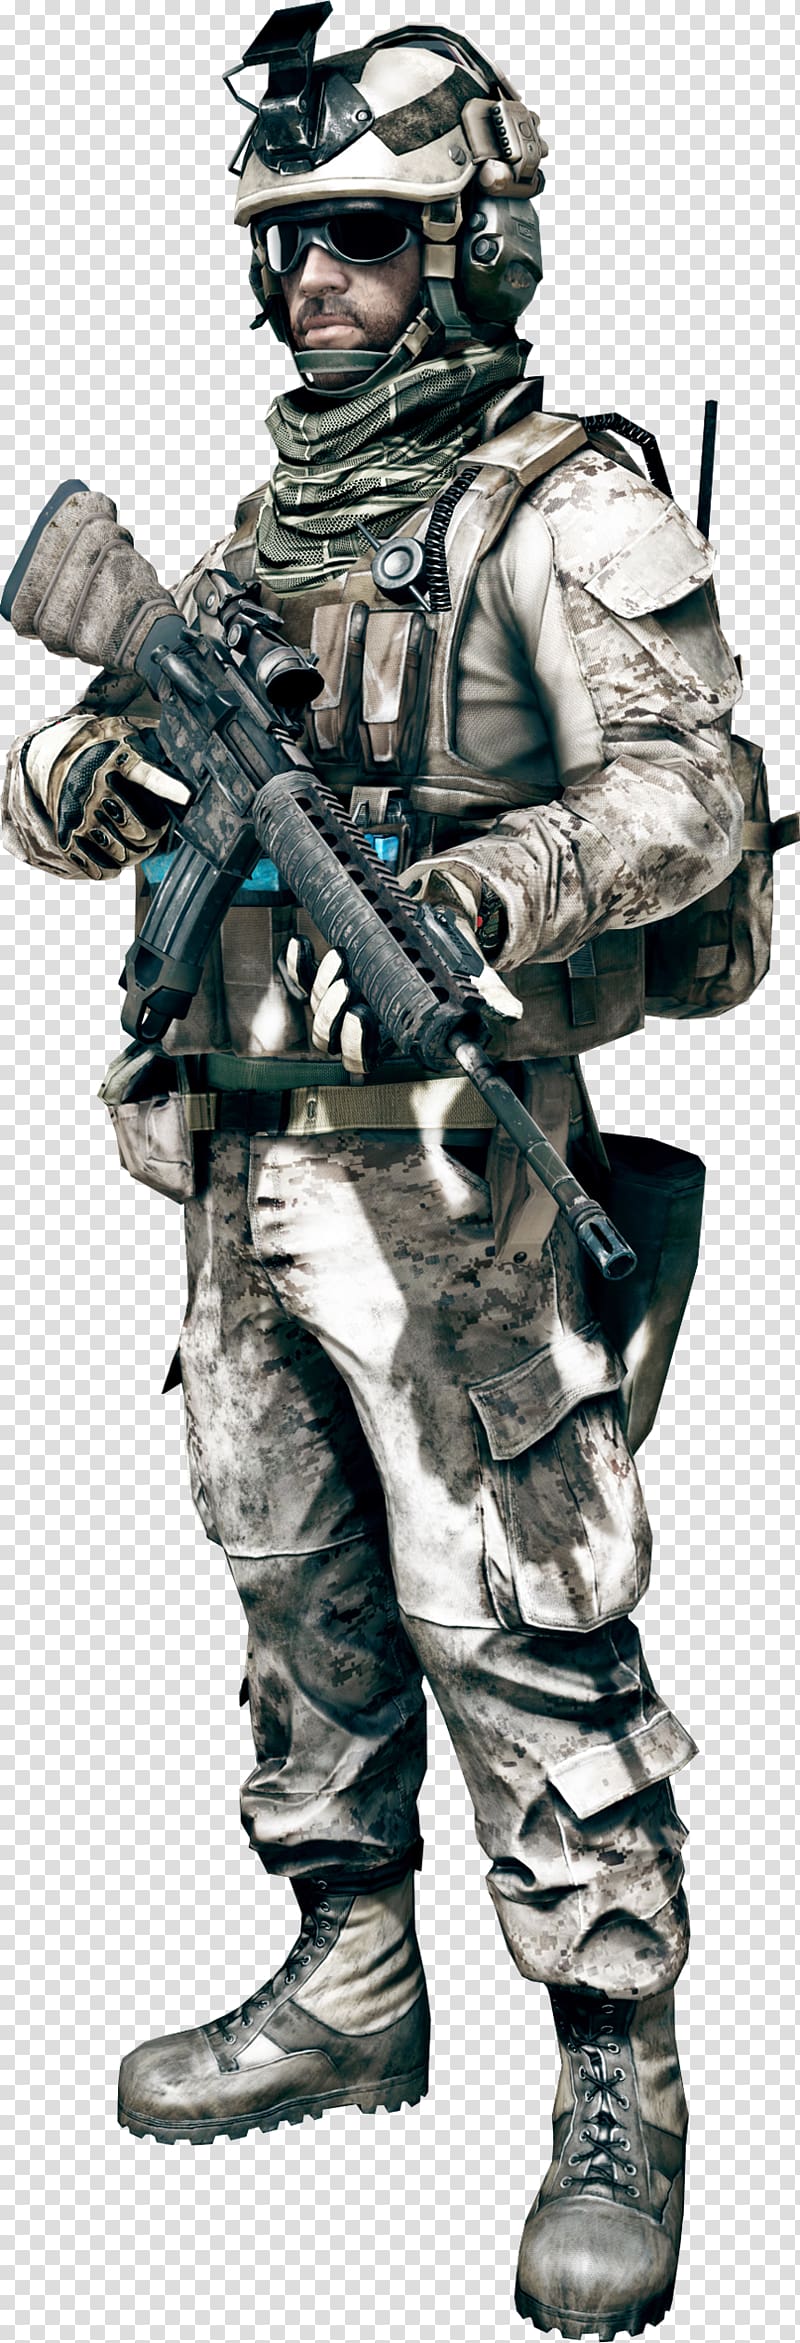 Battlefield 3 Battlefield 4 Battlefield 1 Battlefield 2 Battlefield: Bad Company 2, soldiers transparent background PNG clipart